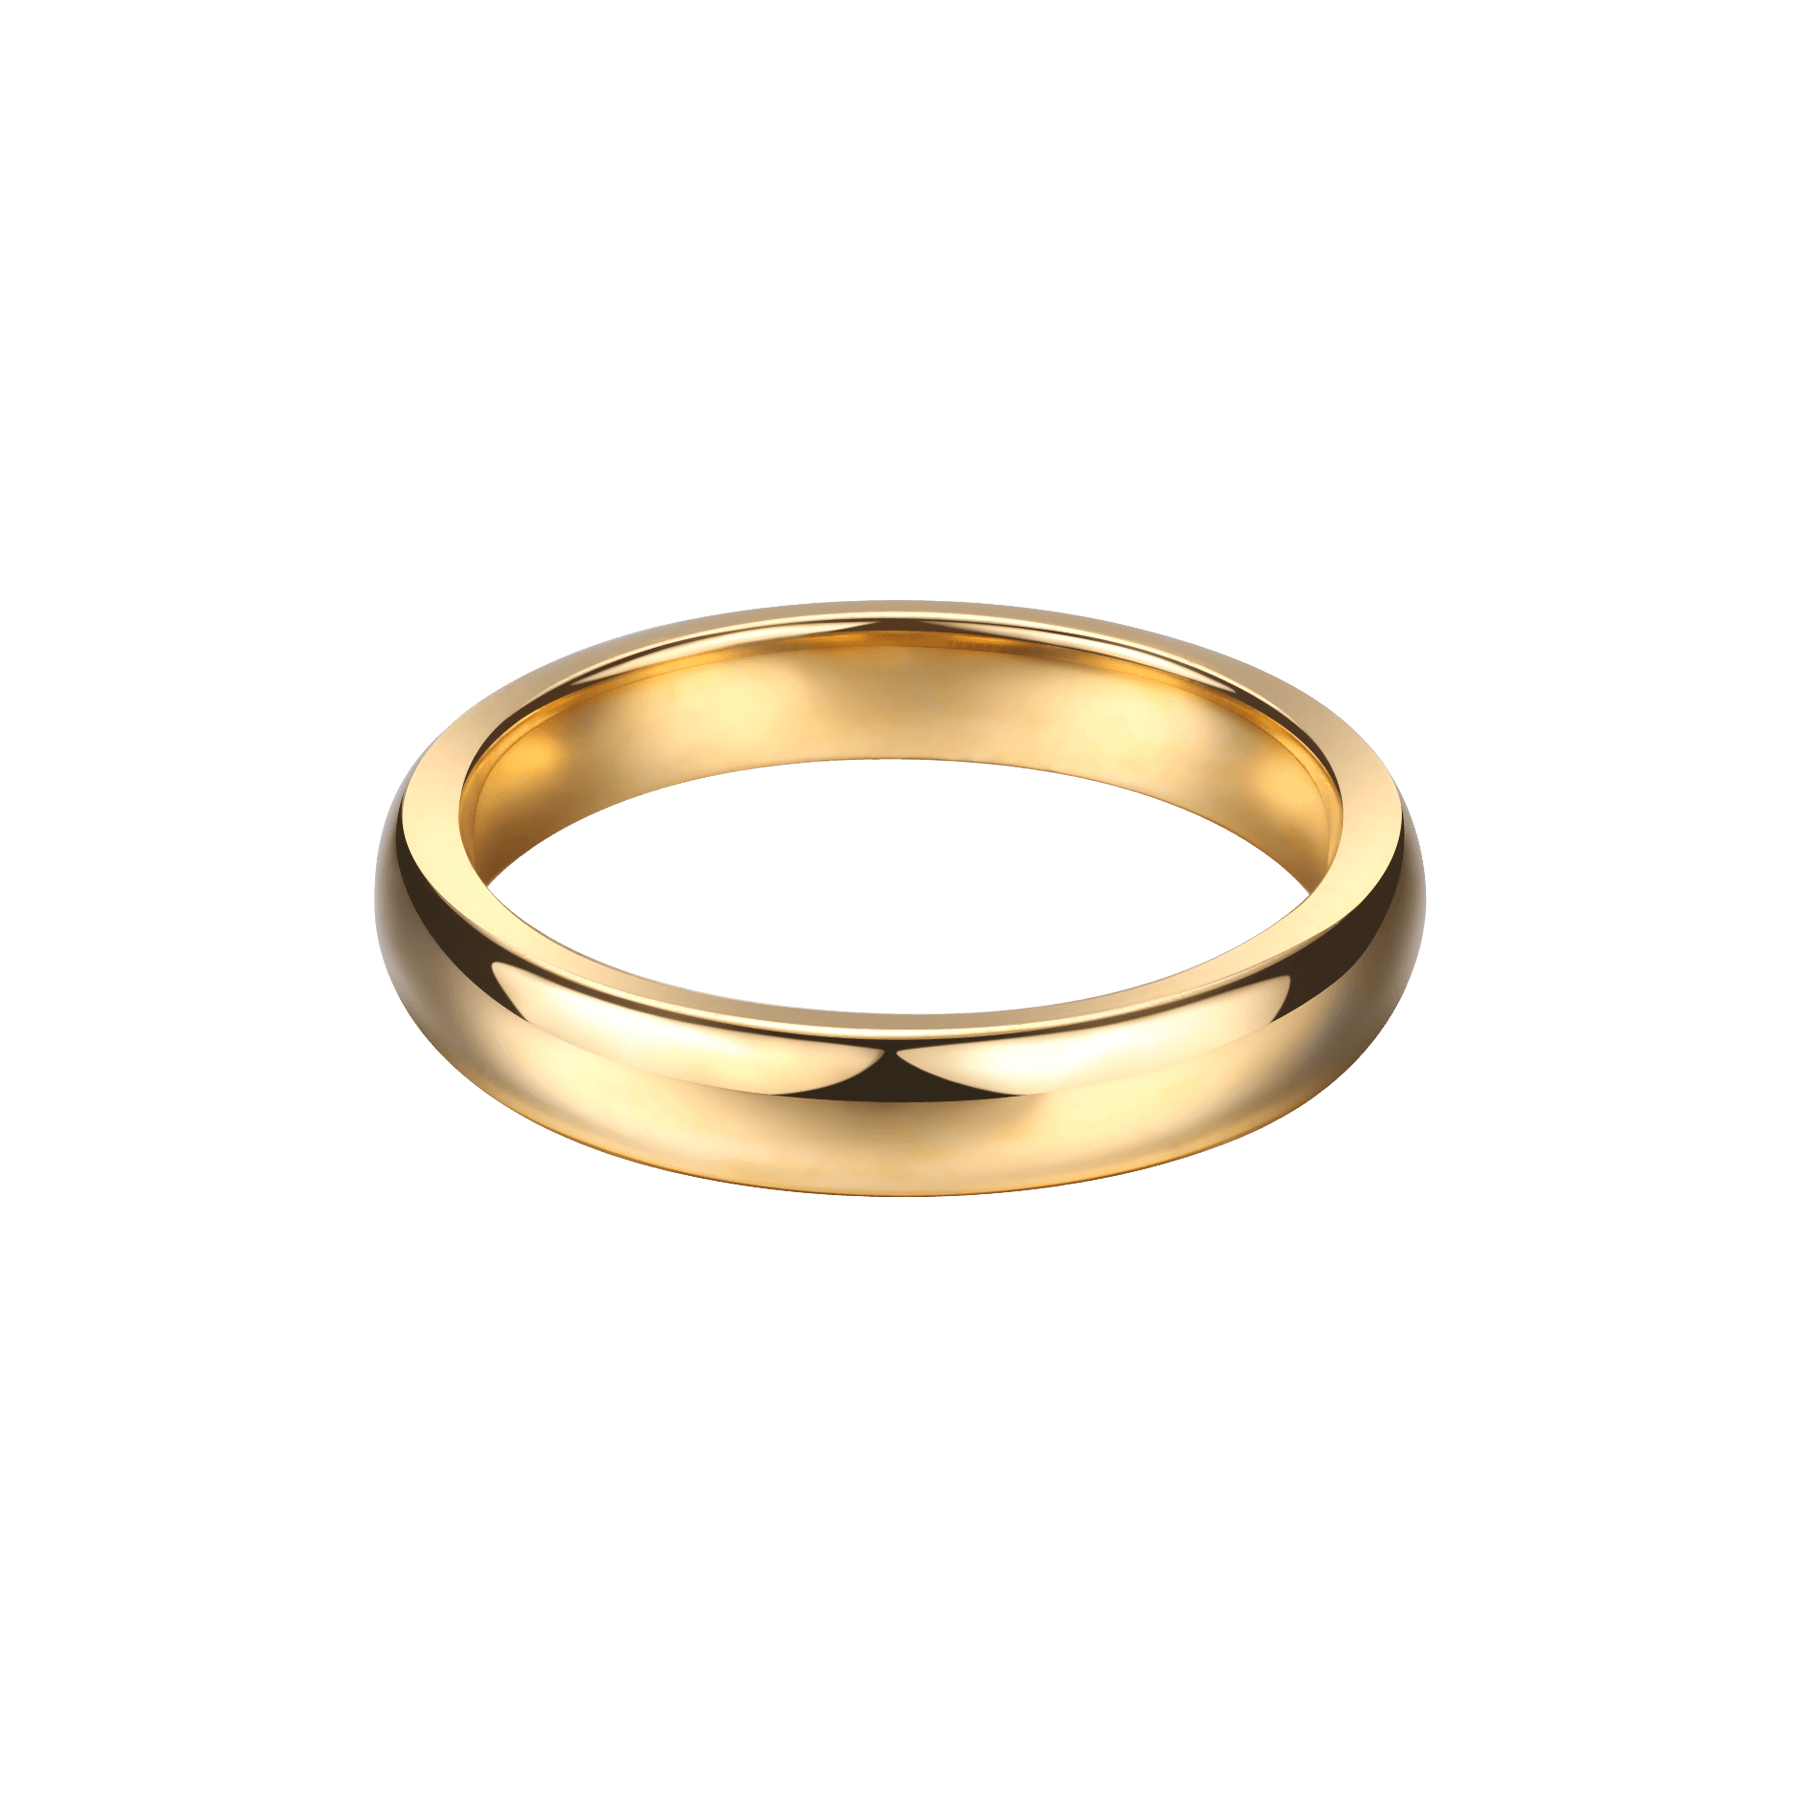 FAVPNG_wedding-ring-jewellery-gold-silver_61qeJXZY (1)